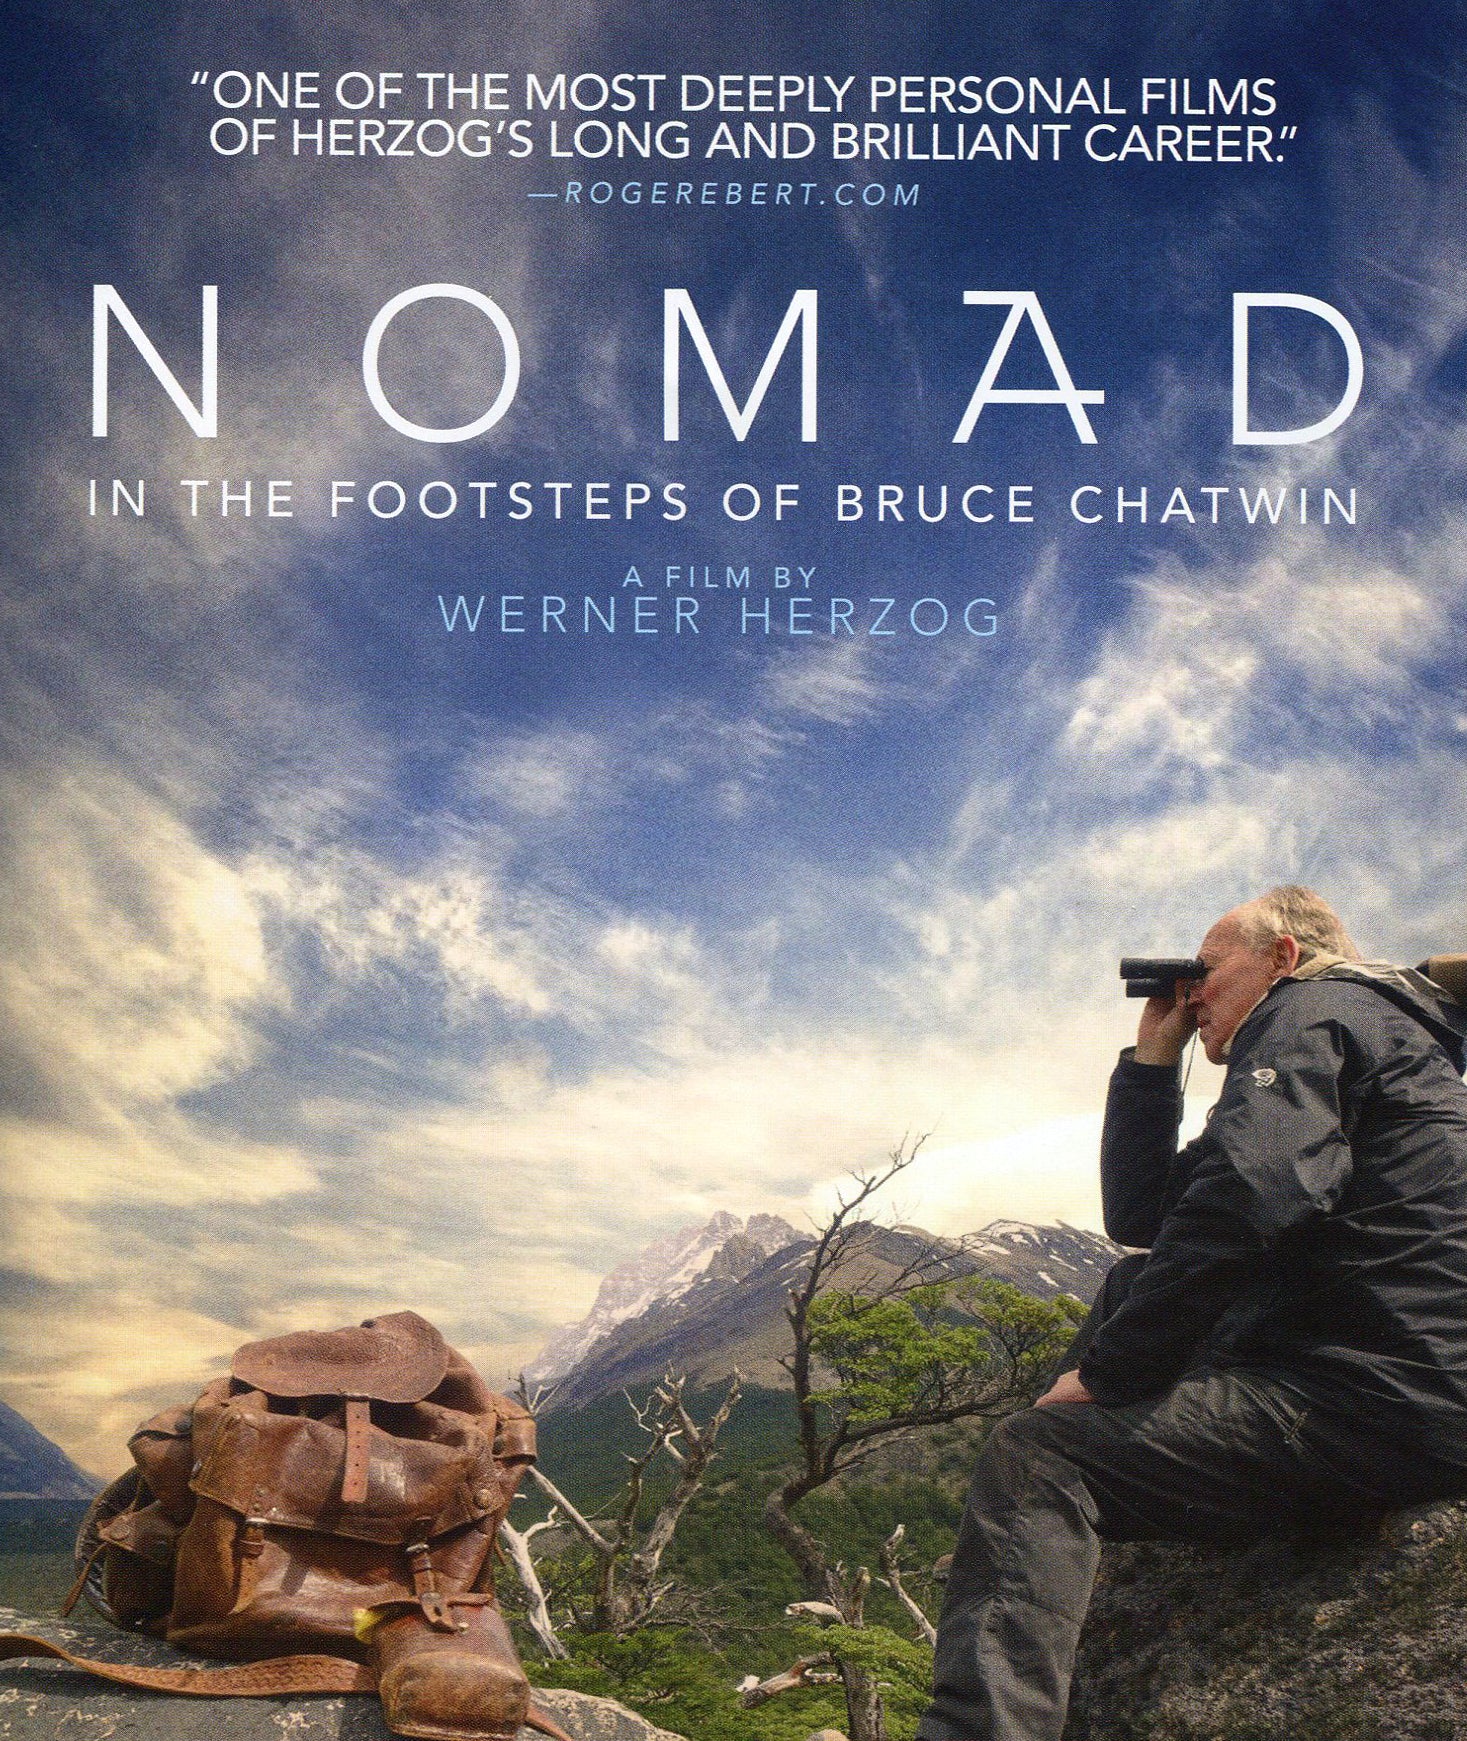 Nomad: In the Footsteps of Bruce Chatwin [Blu-ray] cover art